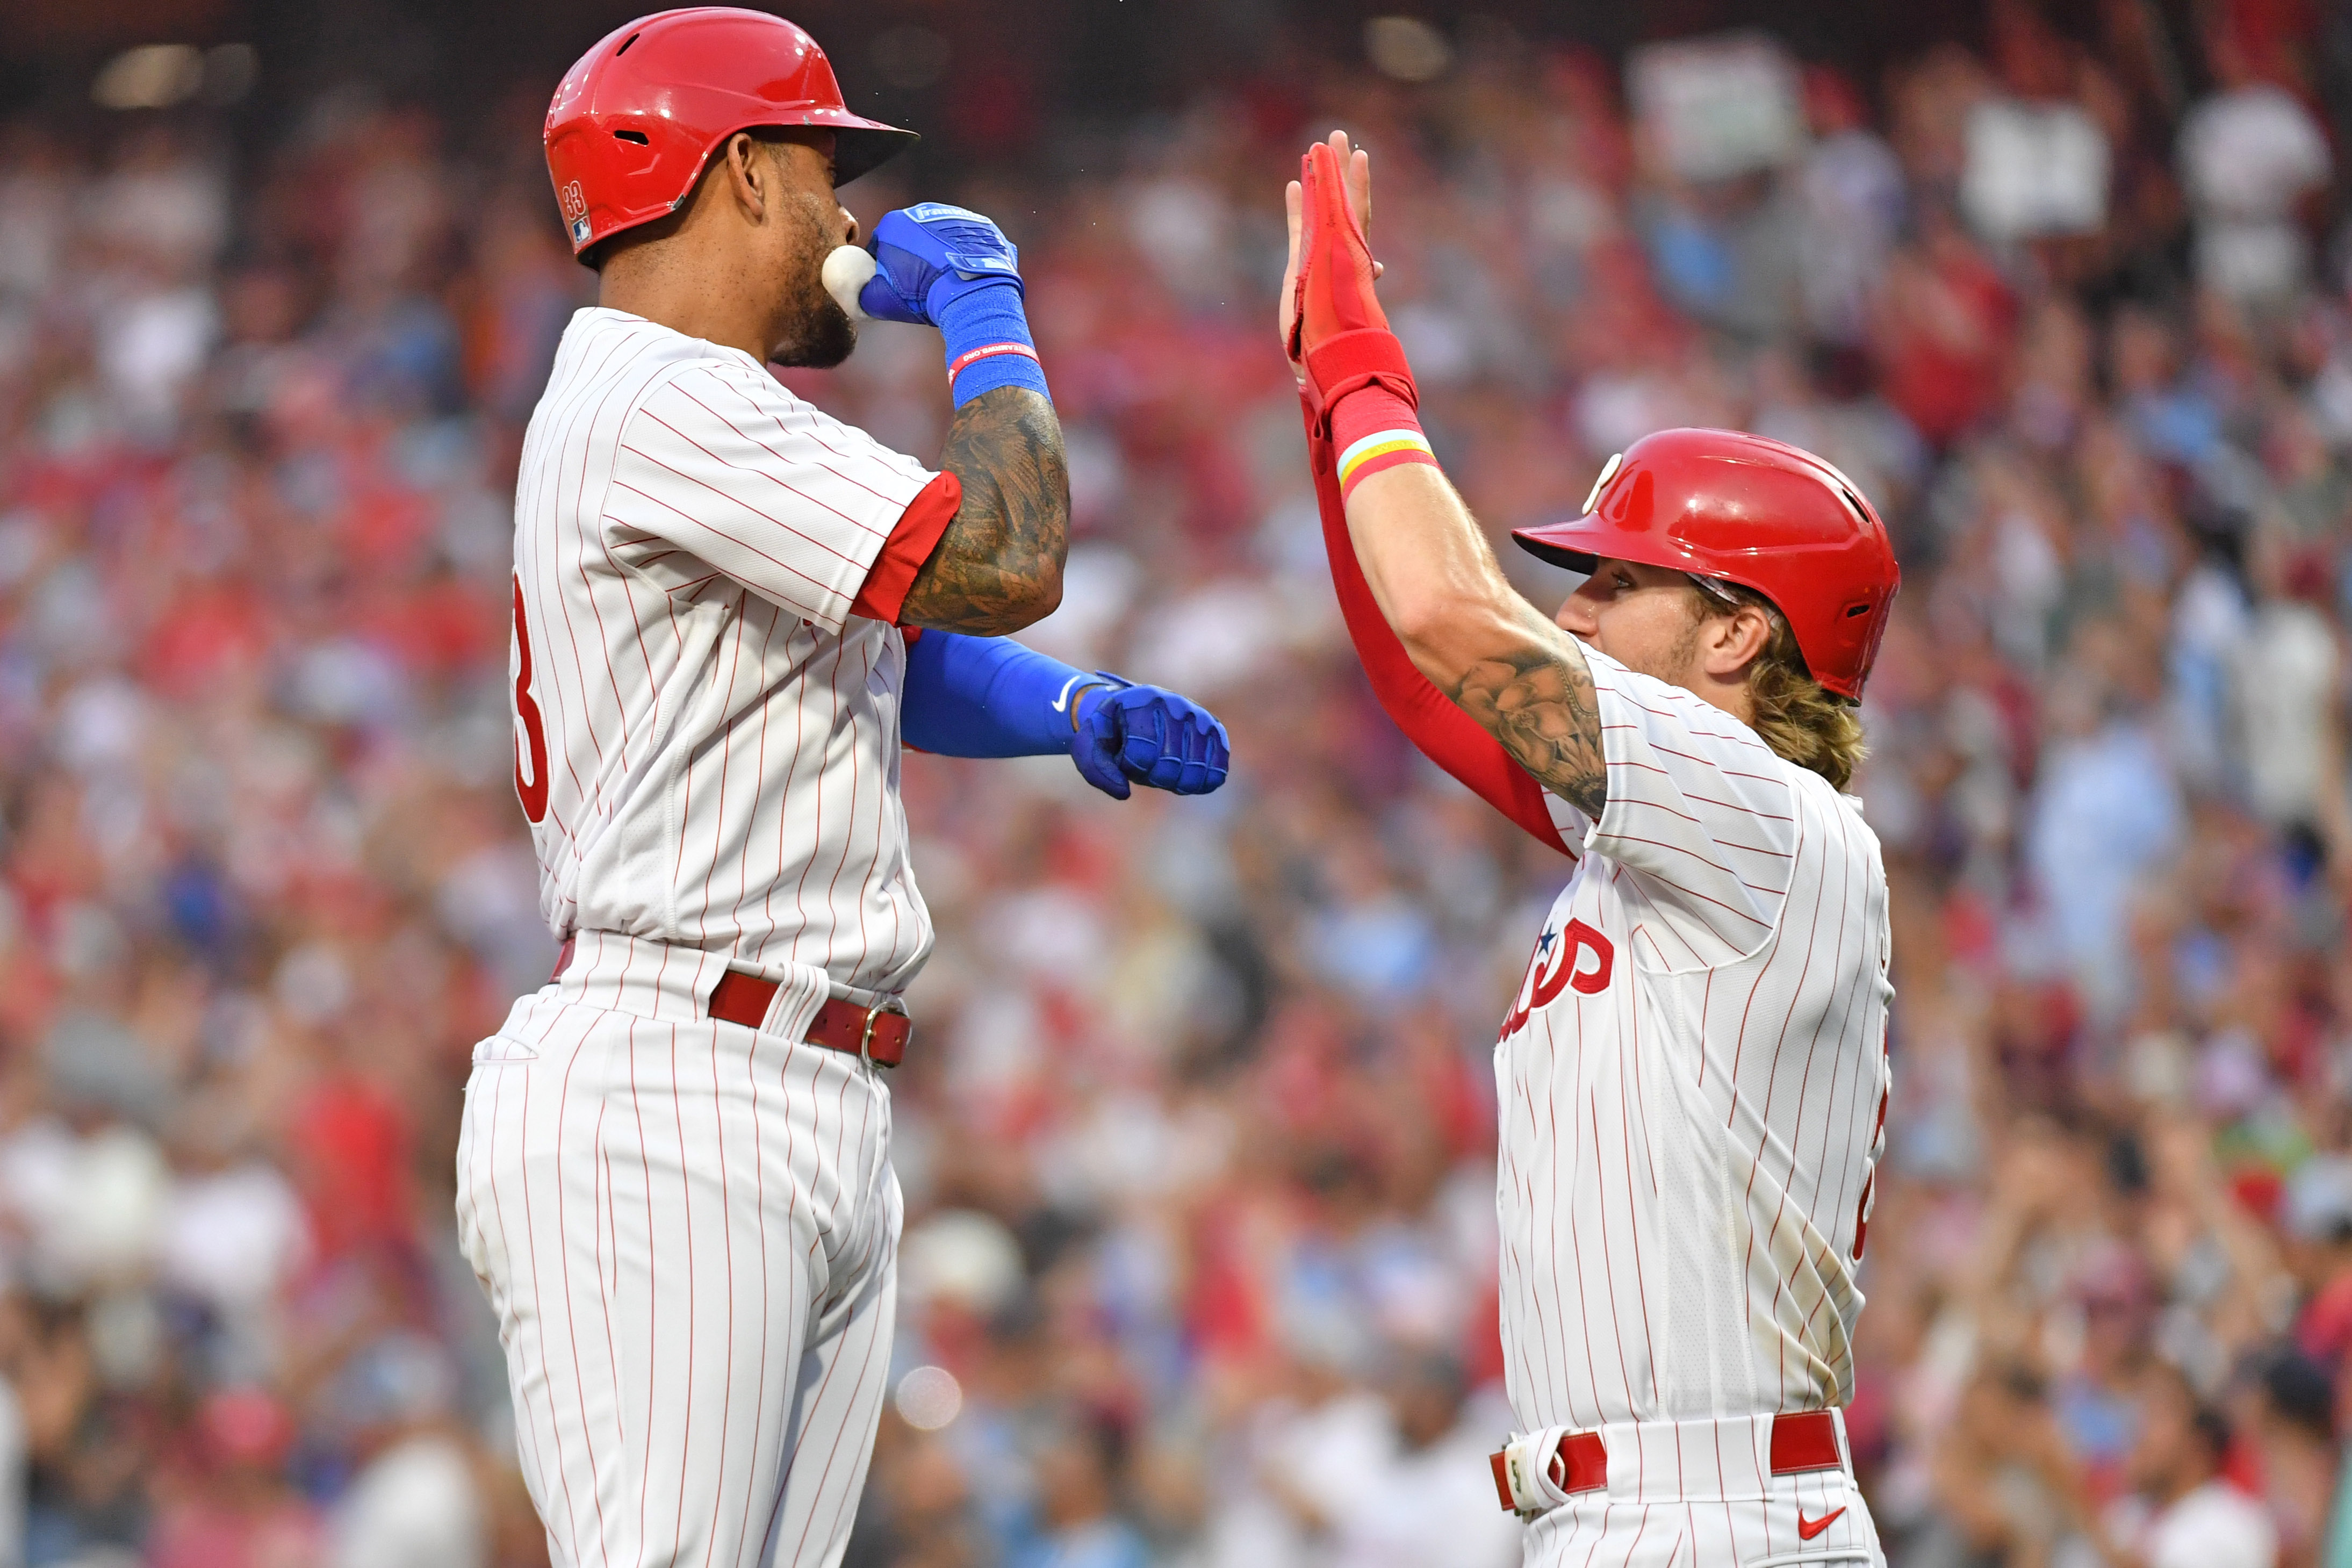 Unconventional manner, but Giants hold on to beat Phillies 4-3